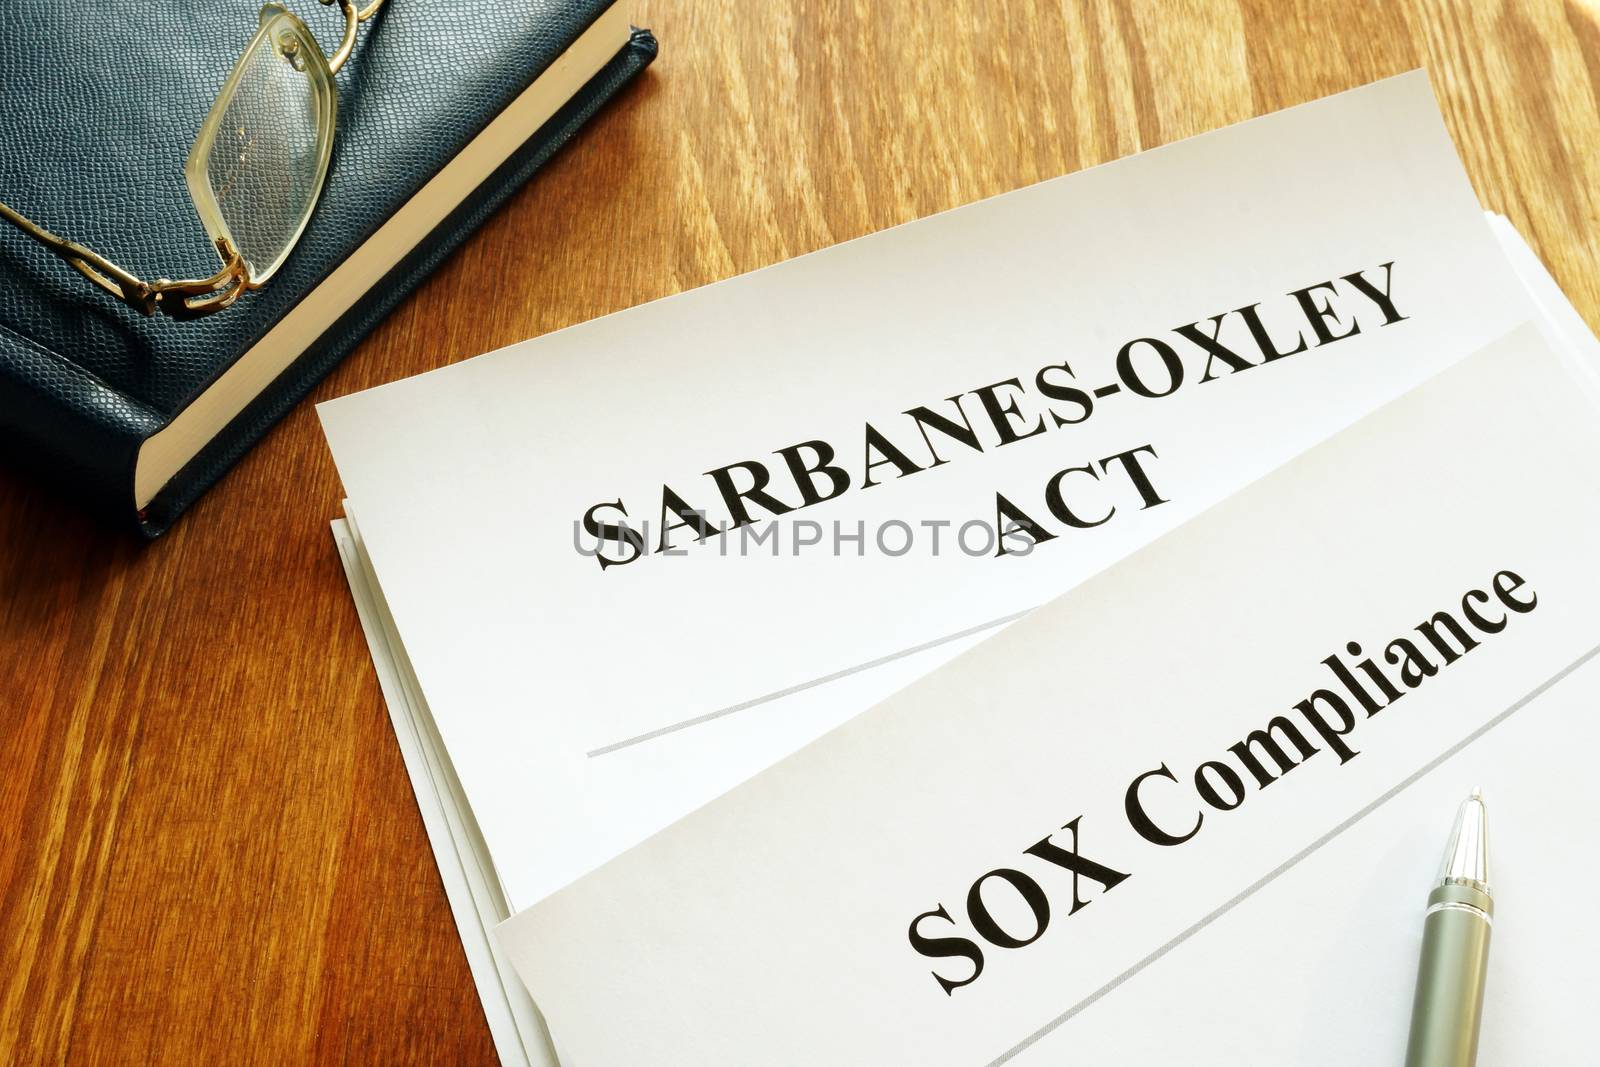 Sarbanes-Oxley Act and SOX compliance policy on table. by designer491